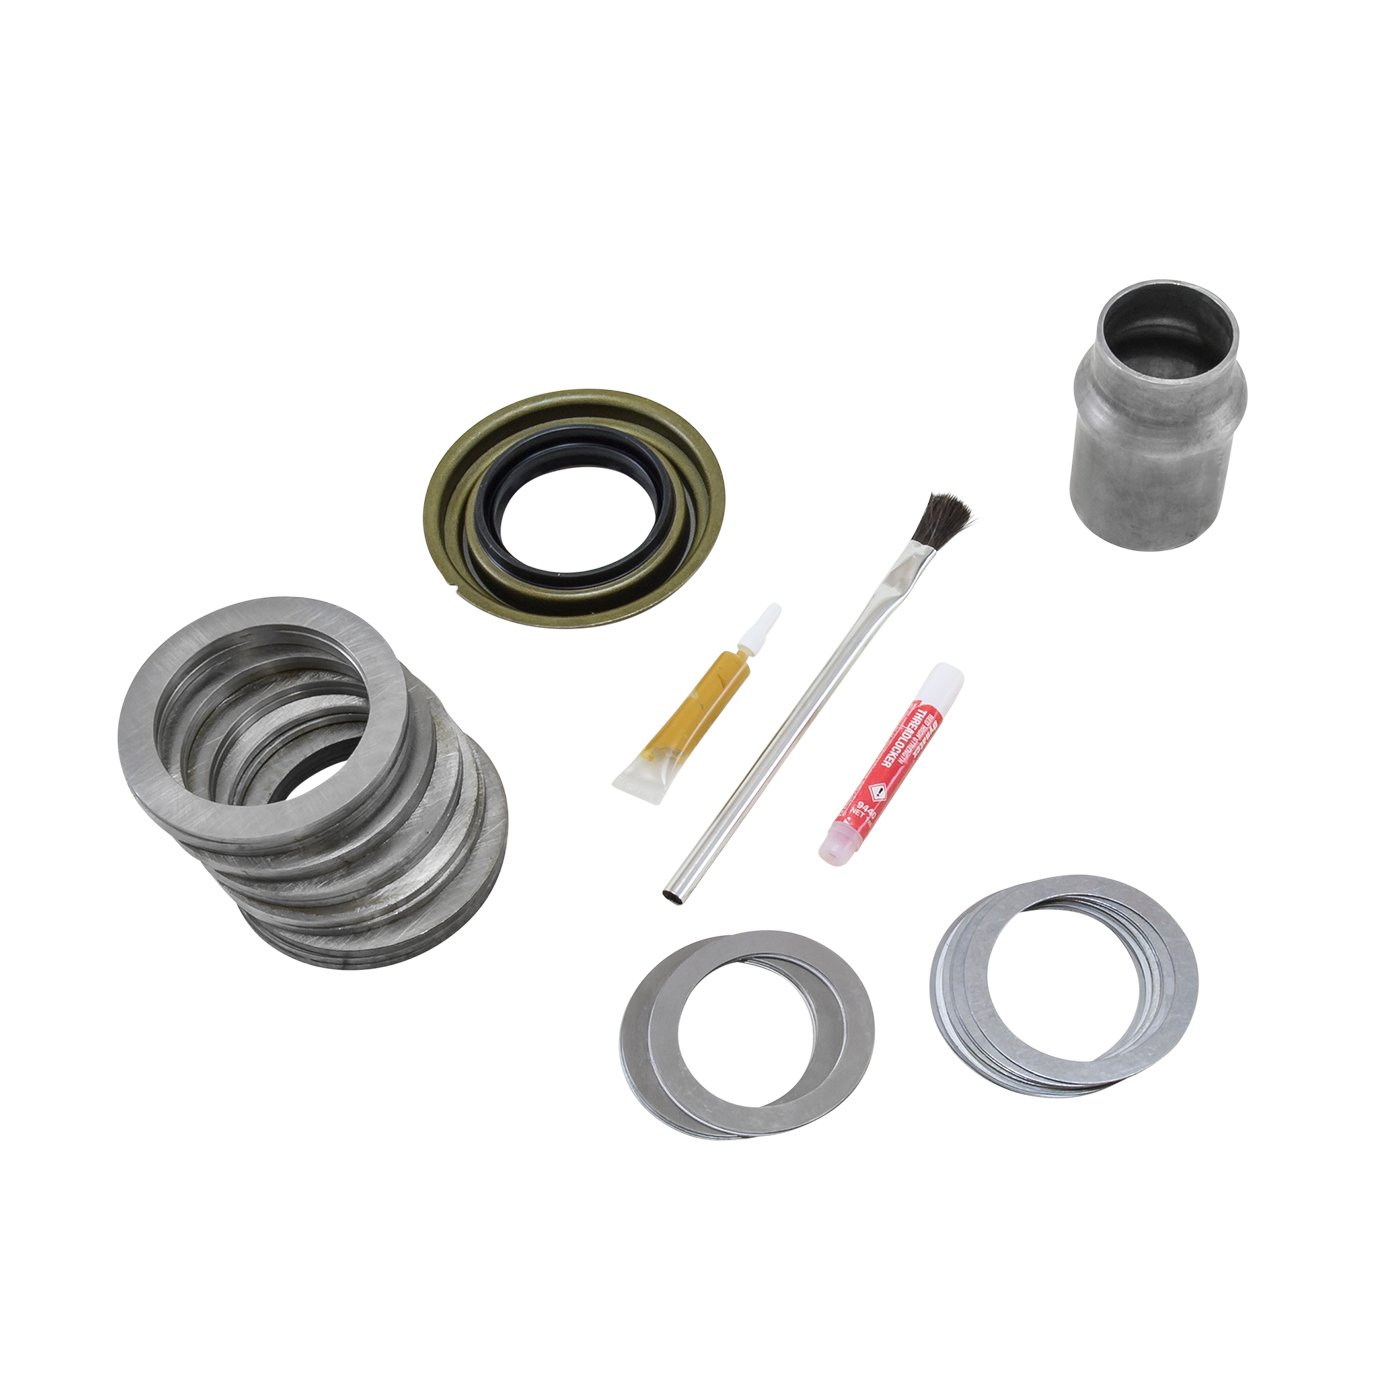 Minor Install Kit For Dana 44-Hd Differential.